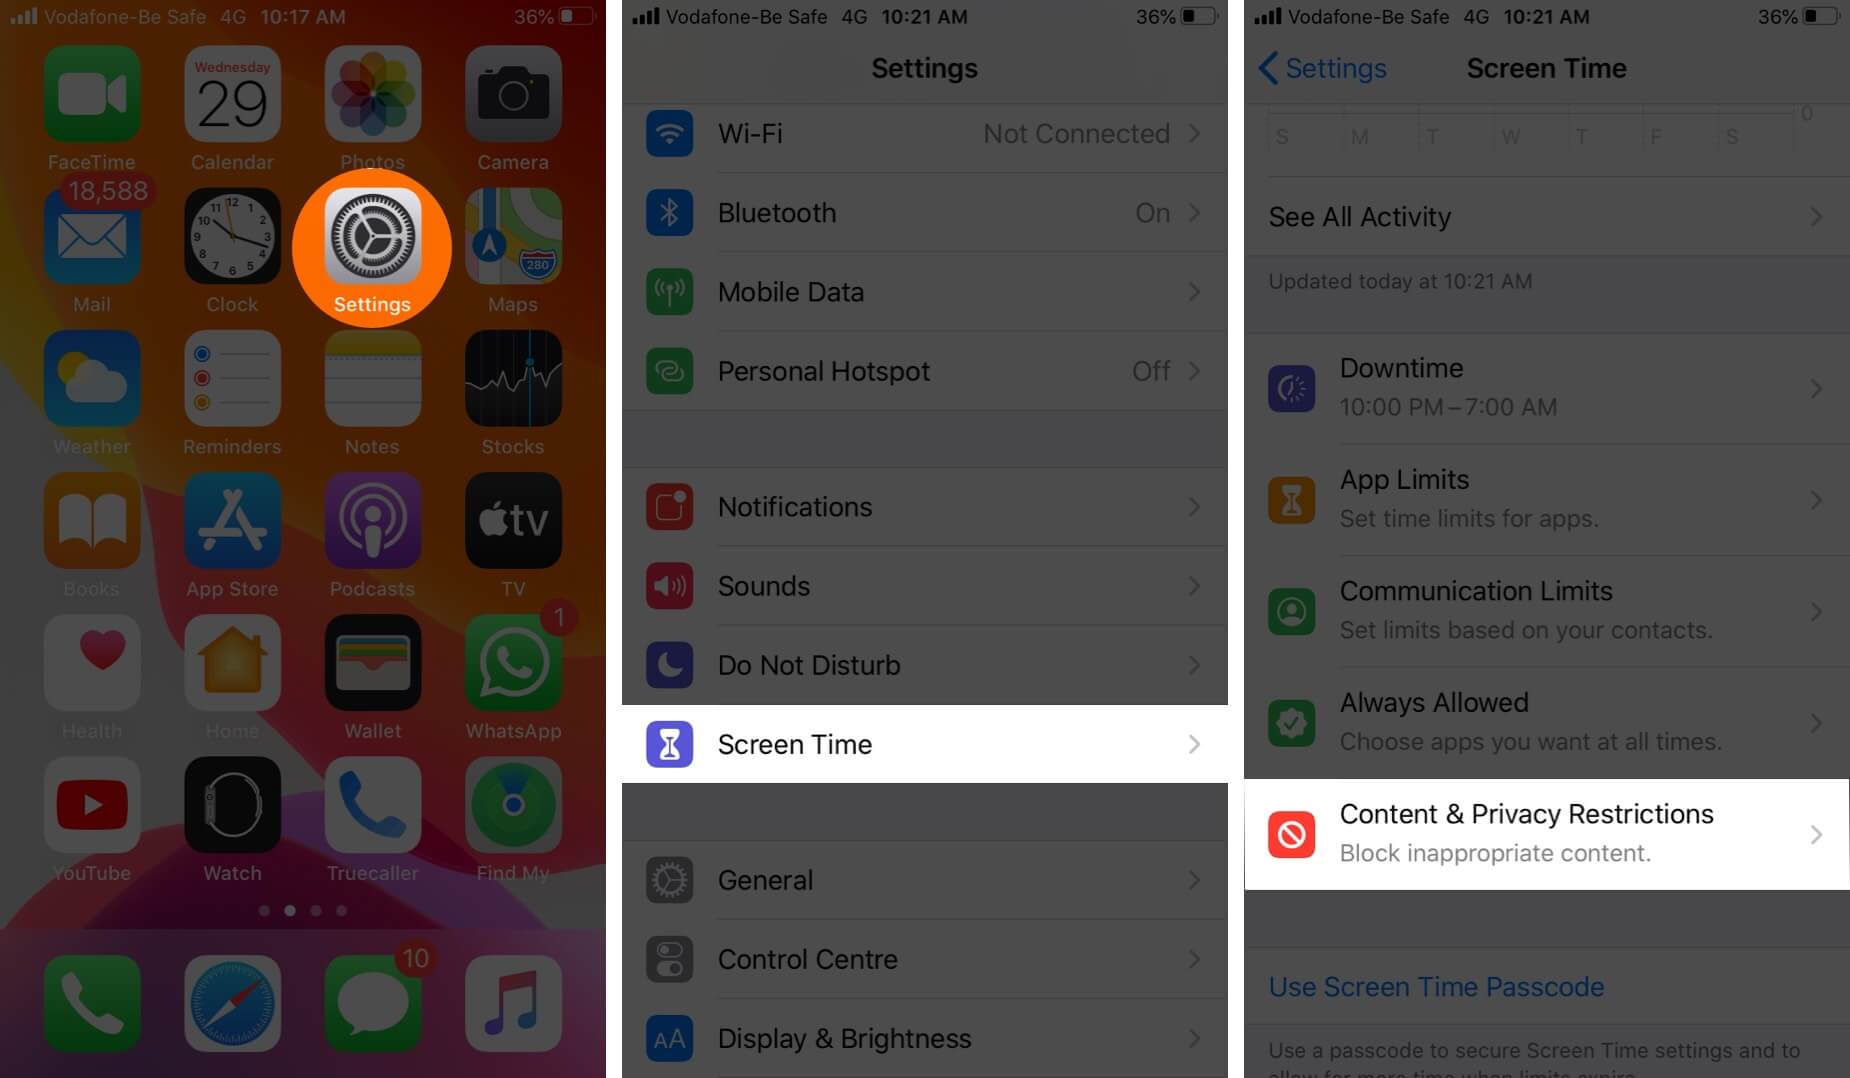 Open Settings Tap on Screen Time and Then Tap on Content & Privacy Restrictions